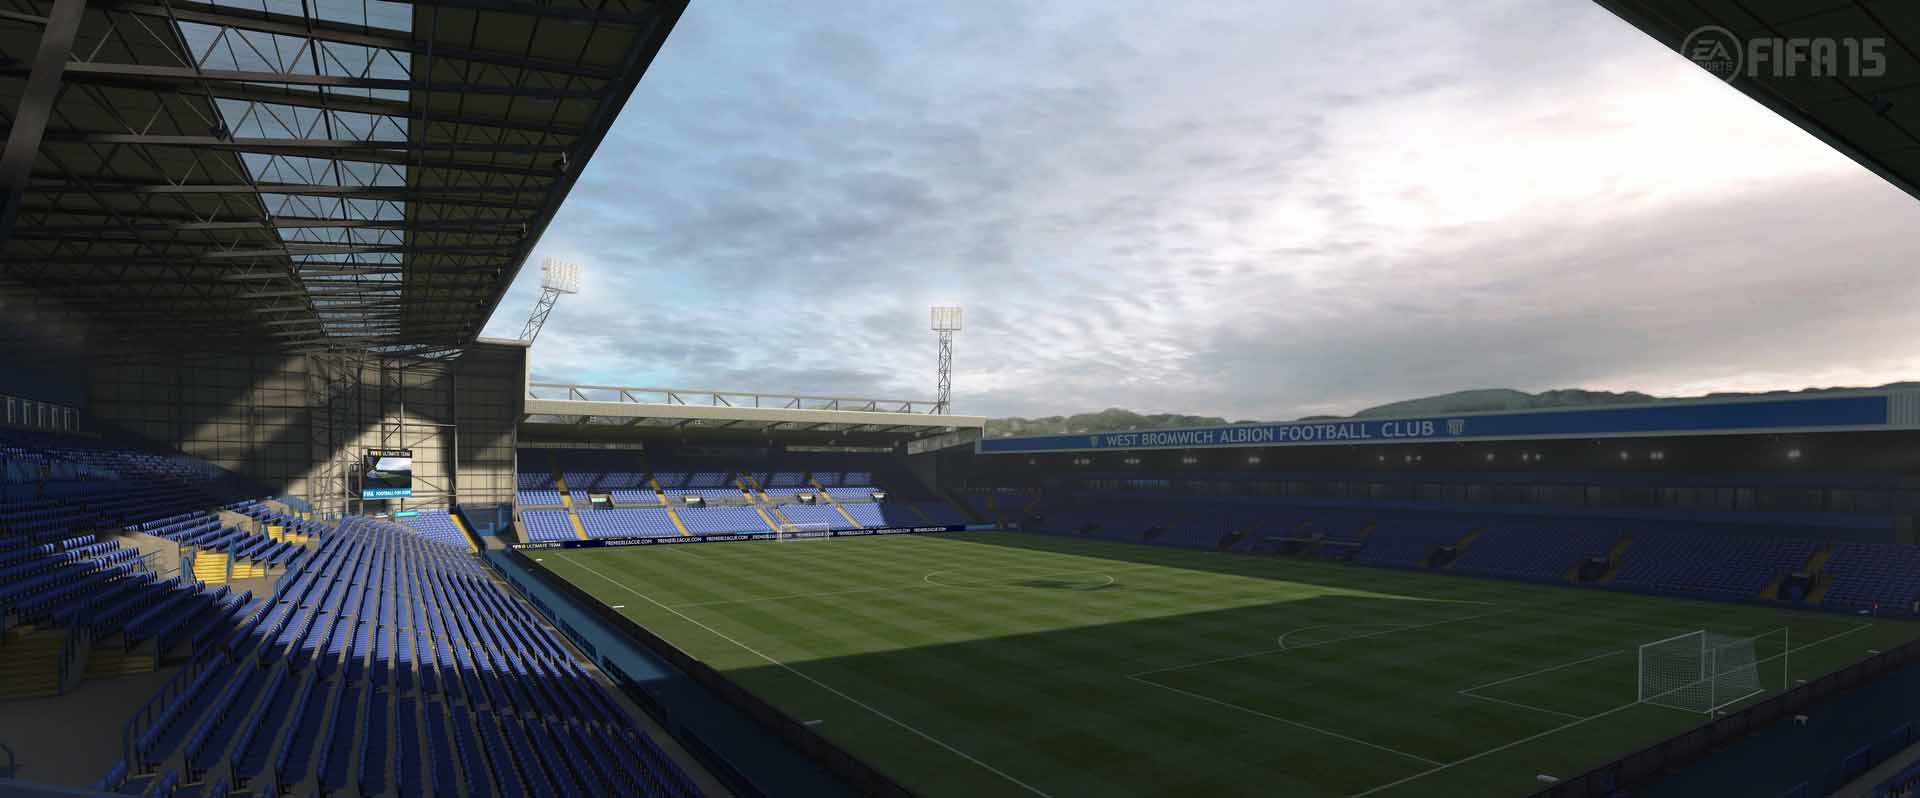 FIFA 15 features all the Barclays Premier League Stadiums